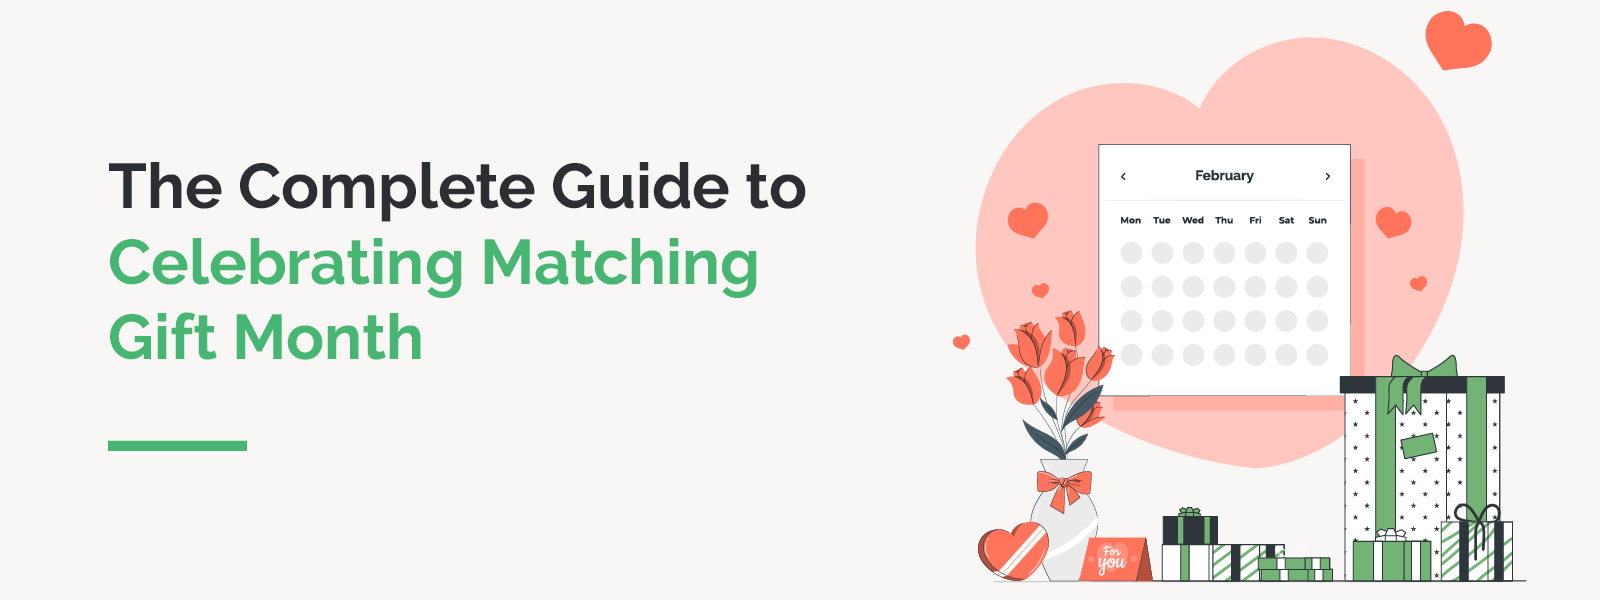 The Complete Guide to Celebrating Matching Gift Month